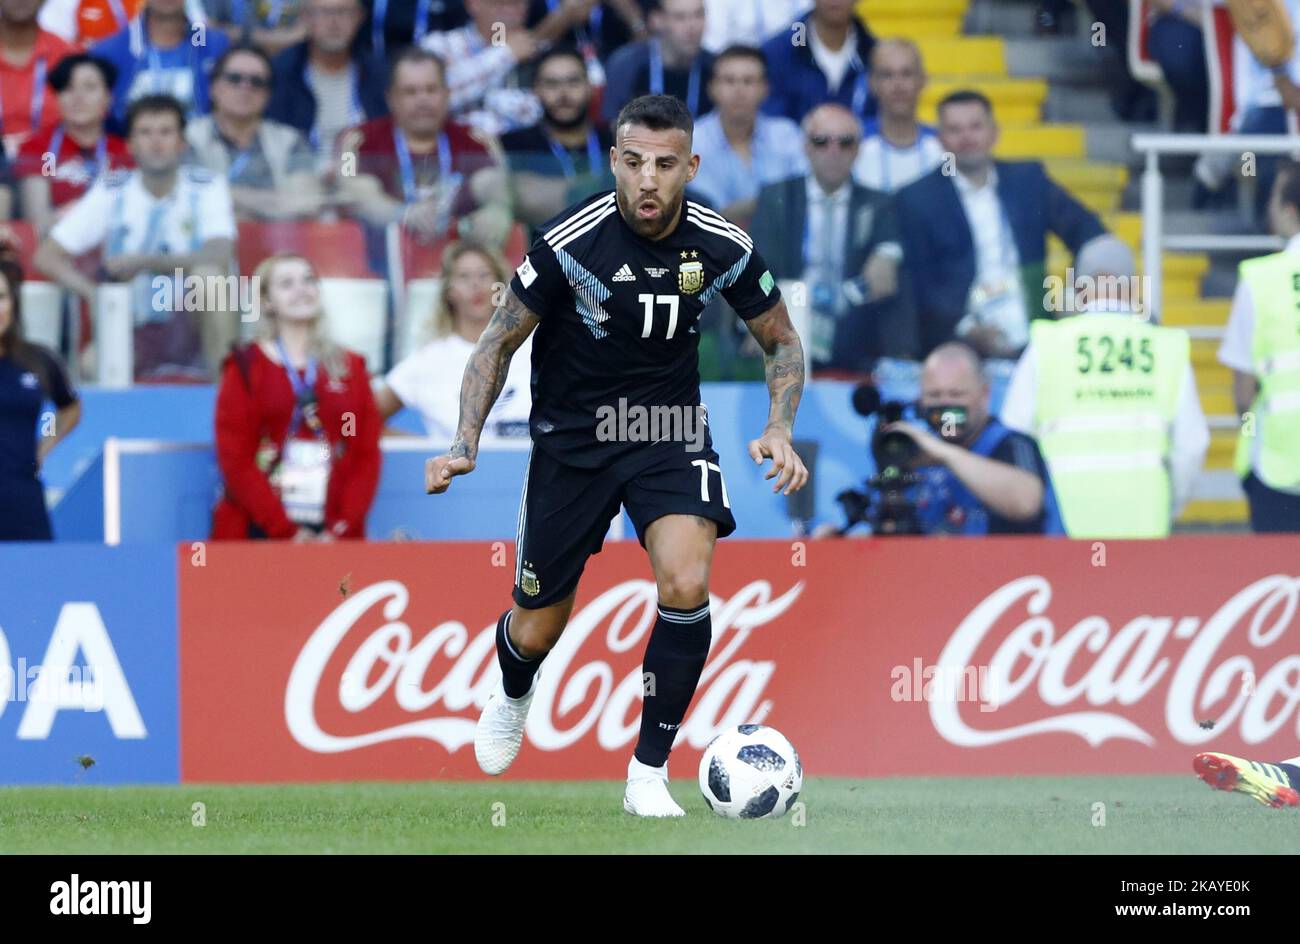 Group D Argetnina v Iceland - FIFA World Cup Russia 2018 Nicolas Otamendi (Argentina) at Spartak Stadium in Moscow, Russia on June 16, 2018. (Photo by Matteo Ciambelli/NurPhoto)  Stock Photo